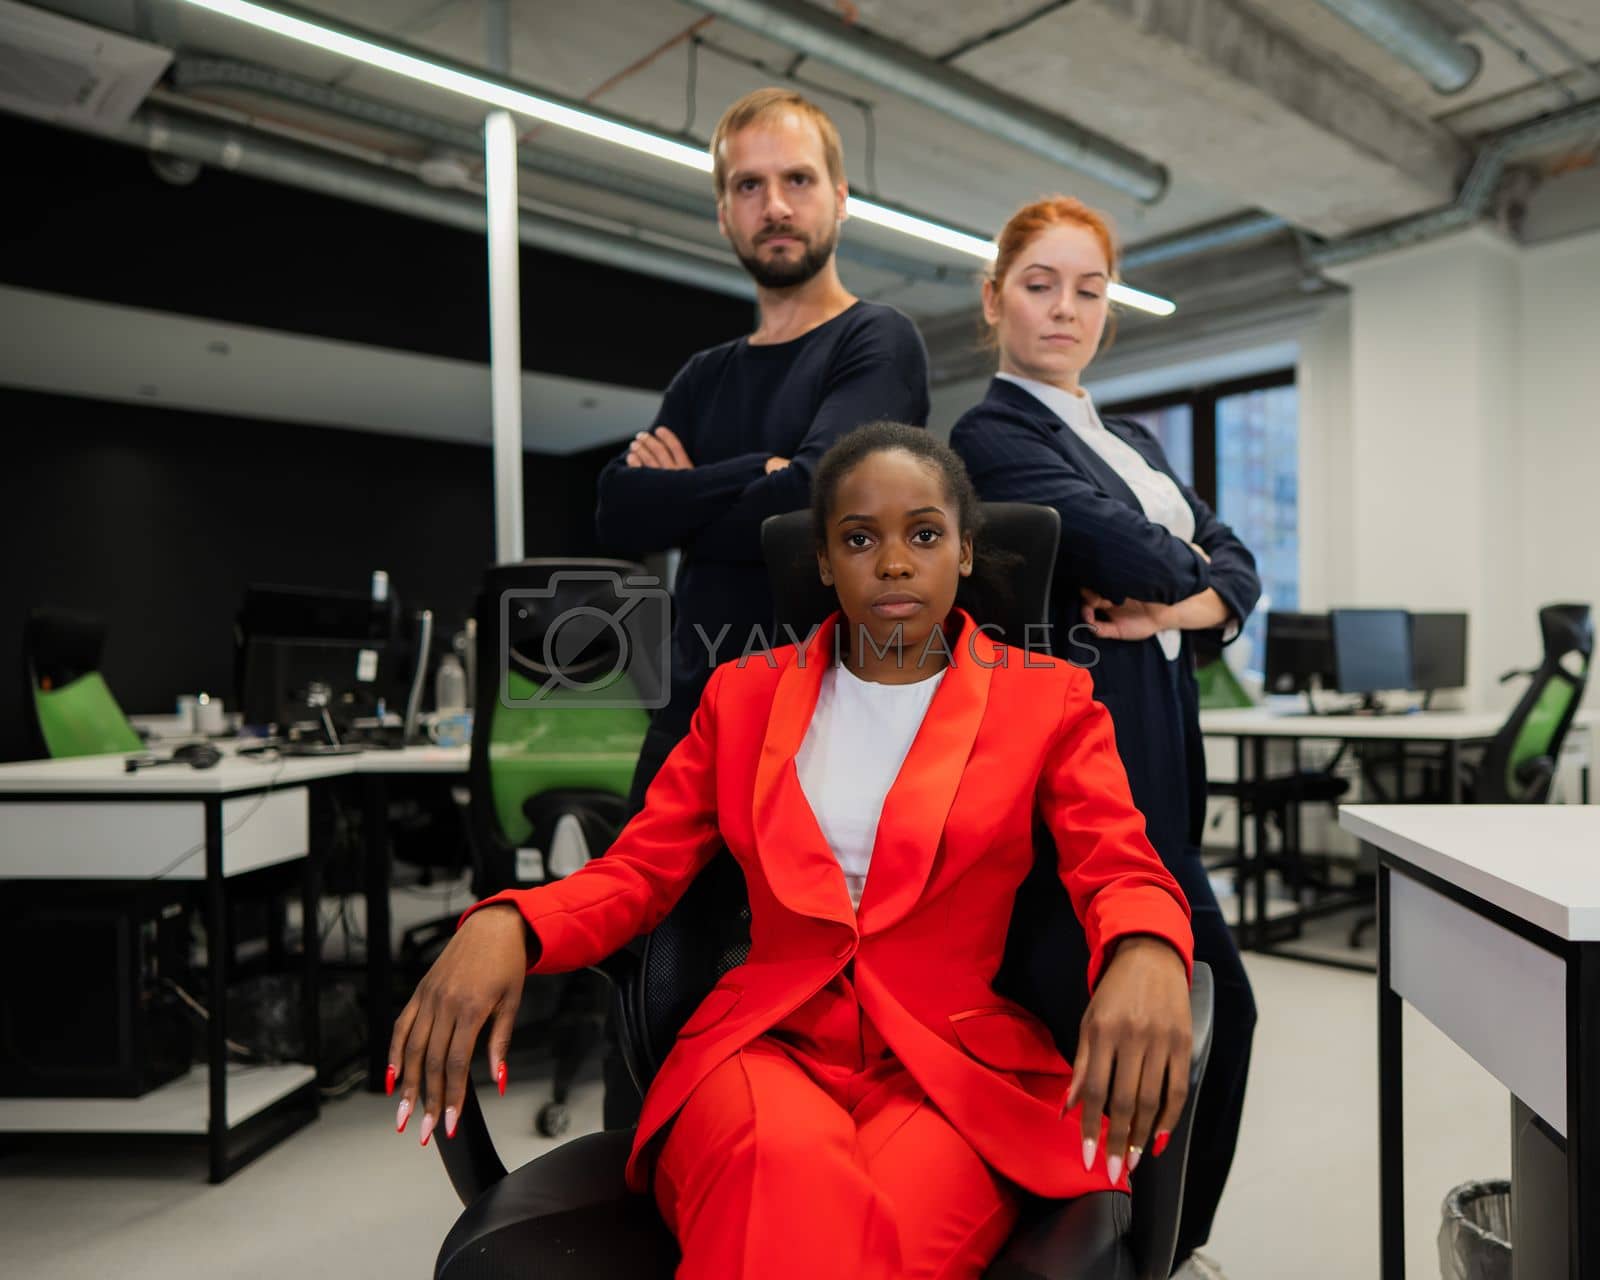 Royalty free image of Caucasian red-haired woman, bearded Caucasian man stand behind a seated African American young woman in the office. by mrwed54